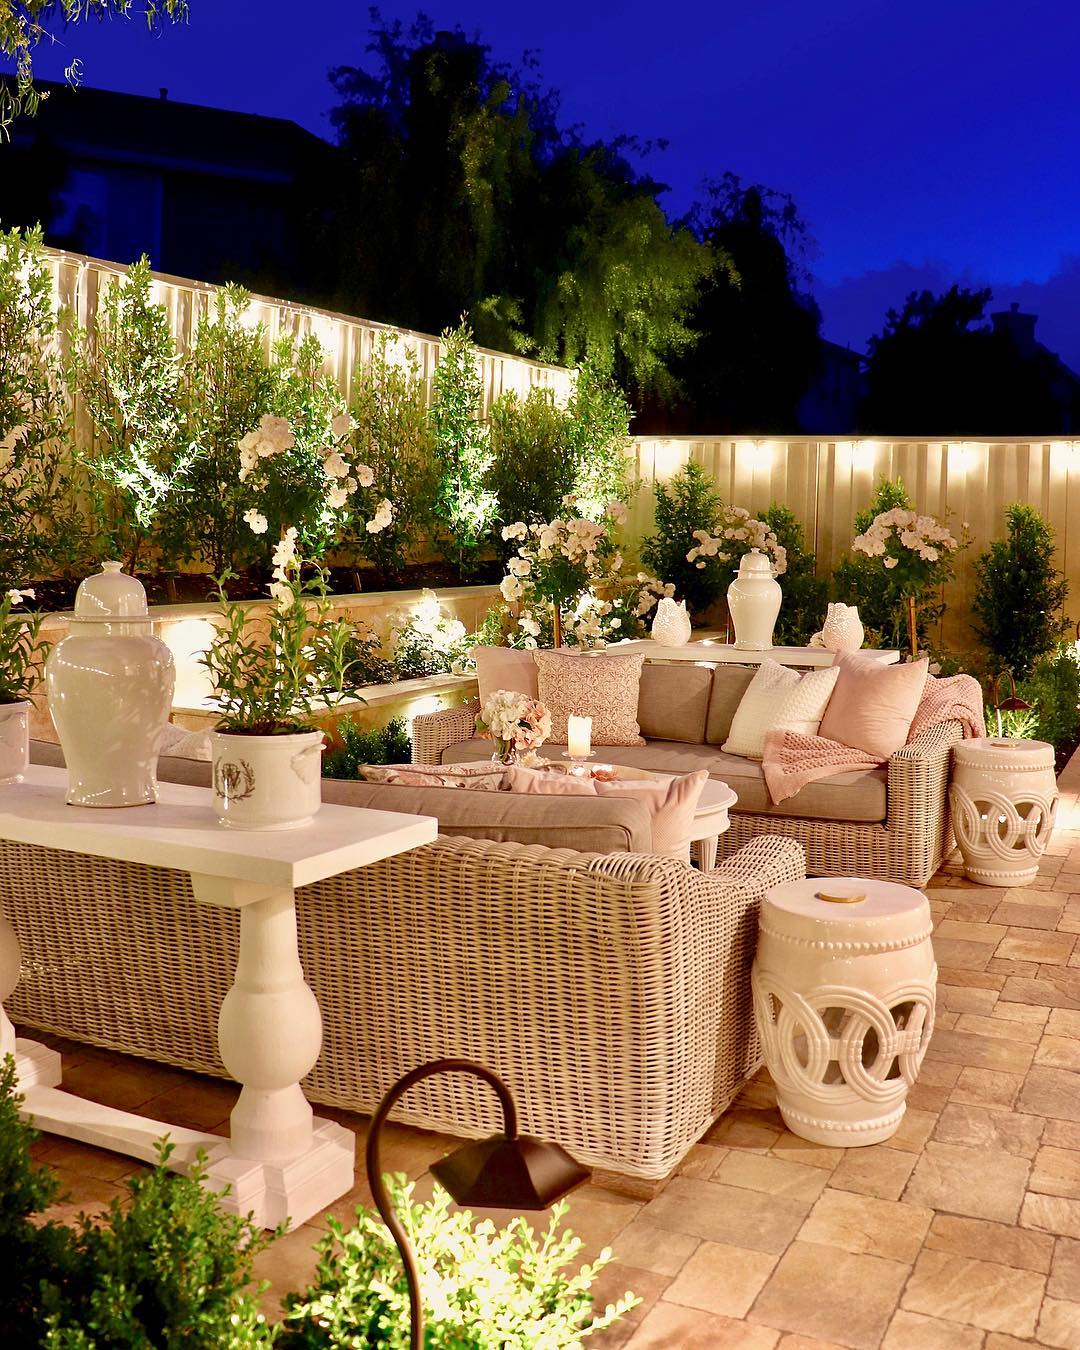 20 Ideas for Designing a Backyard Party Space   Extra Space Storage